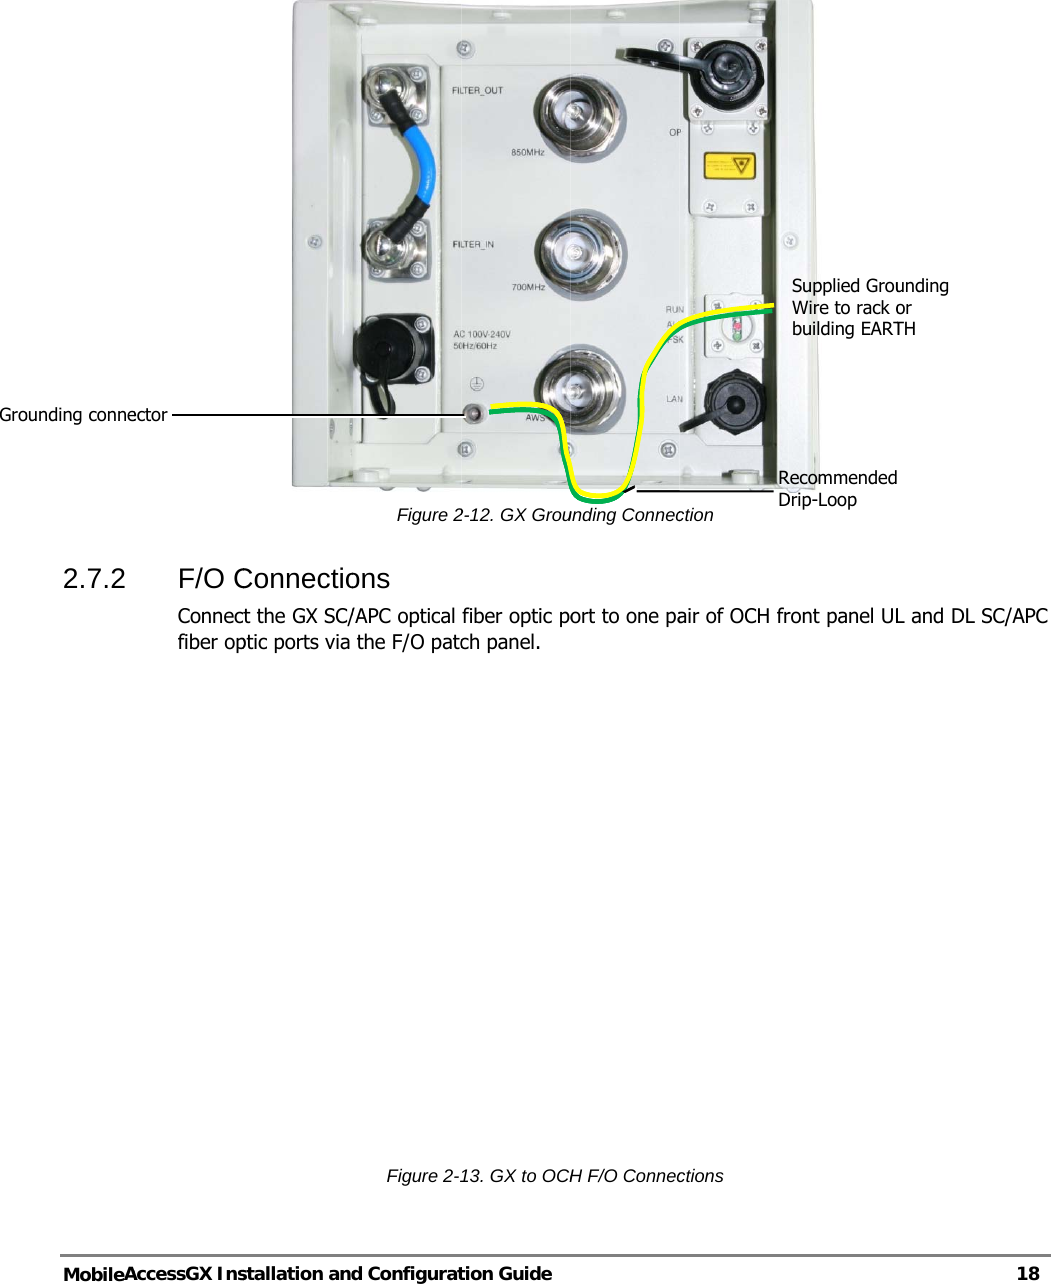 Gro  MobileA2.7.2 ounding conneAccessGX Ins F/O CConnectfiber opector stallation andConnectiot the GX SC/ptic ports via d ConfiguratFigure 2ons /APC optical the F/O patcFigure 2-tion Guide 2-12. GX Groufiber optic poch panel. 13. GX to OCHunding Connecort to one paH F/O Connecction air of OCH frctions RD ront panel ULSupplied GrouWire to rack obuilding EARTRecommendedDrip-Loop L and DL SC/unding or TH  18 /APC  